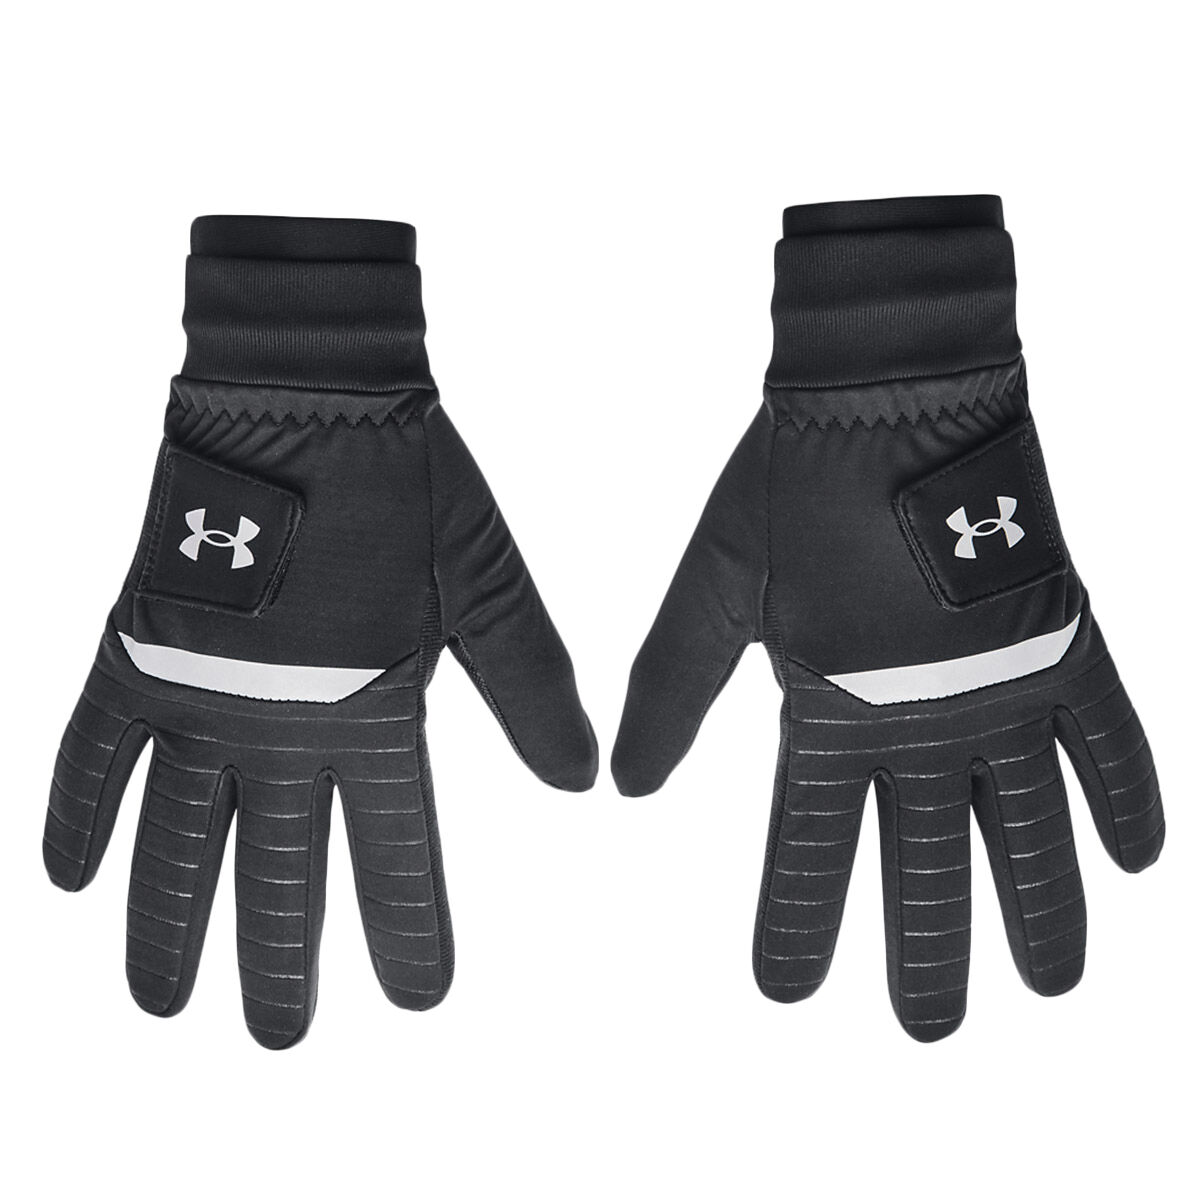 Under Armour Mens Black And Grey Plain CGI Golf Gloves - Pair, Size: Large | American Golf, xl